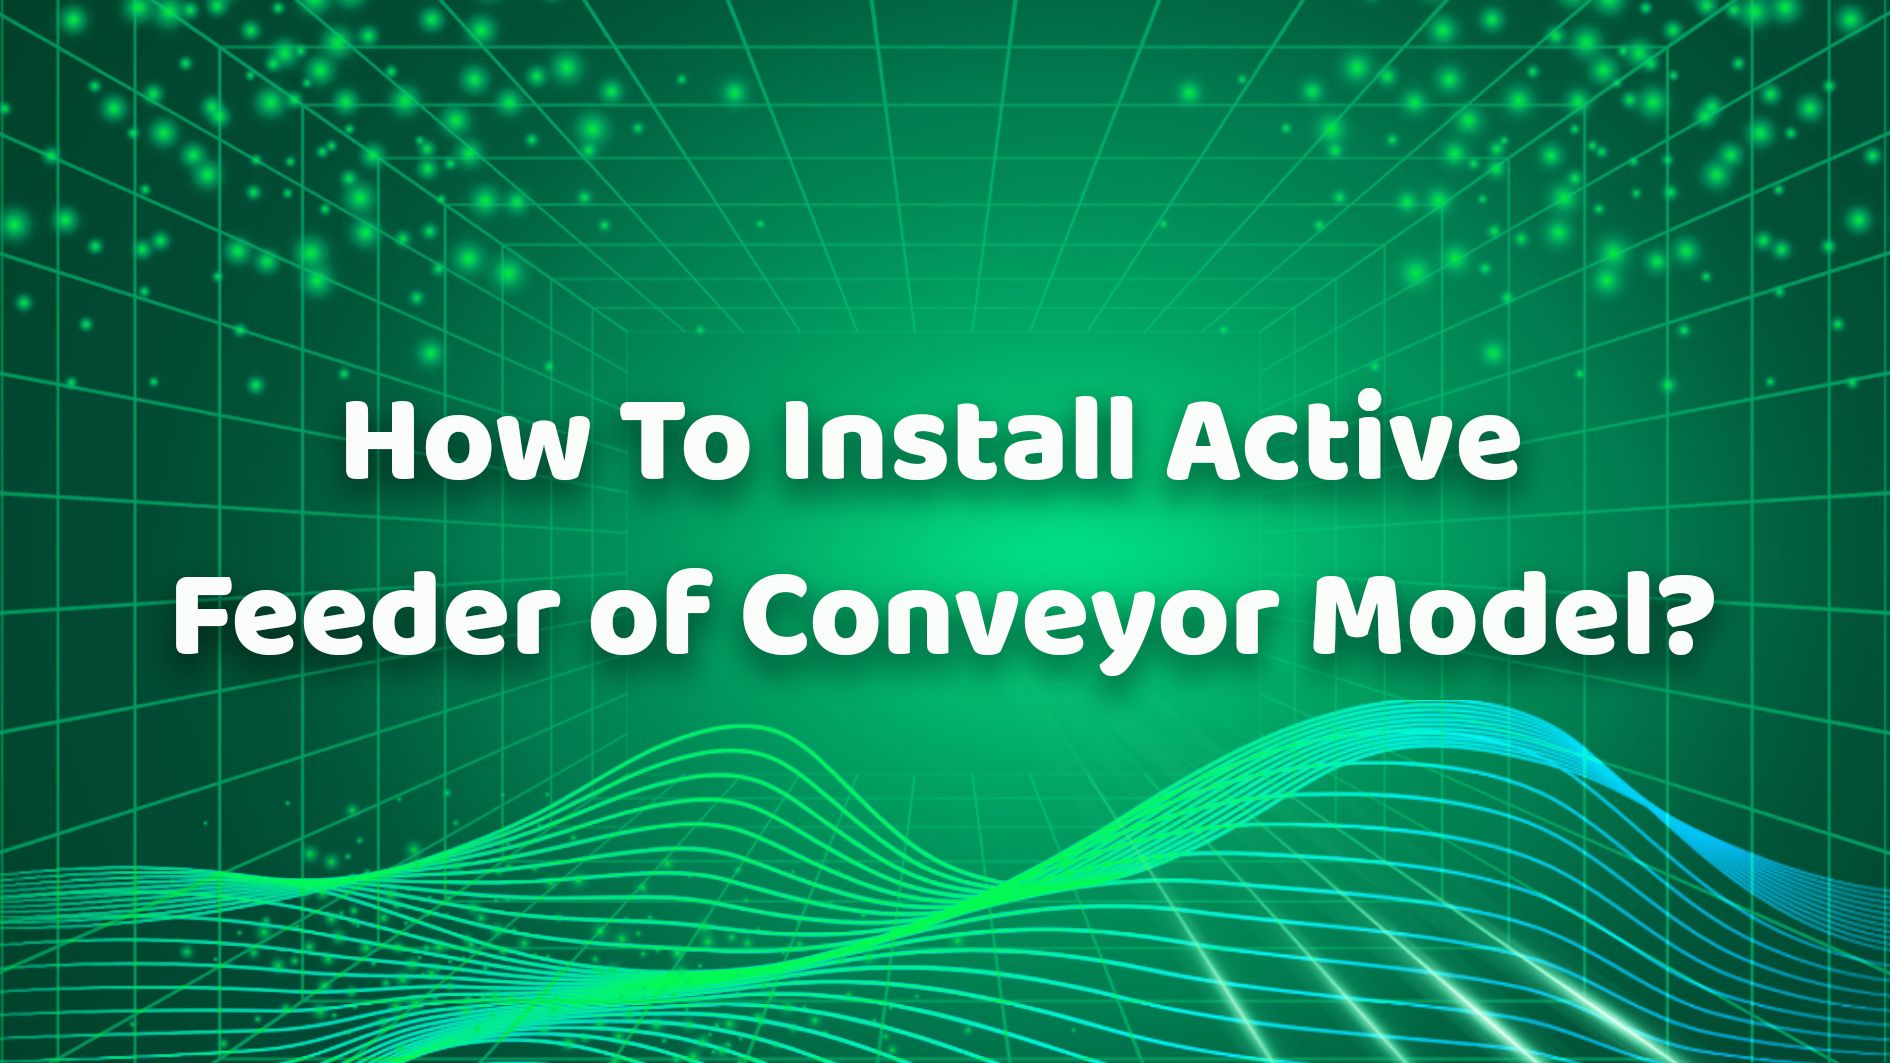 How To Install Active Feeder of Conveyor Model?